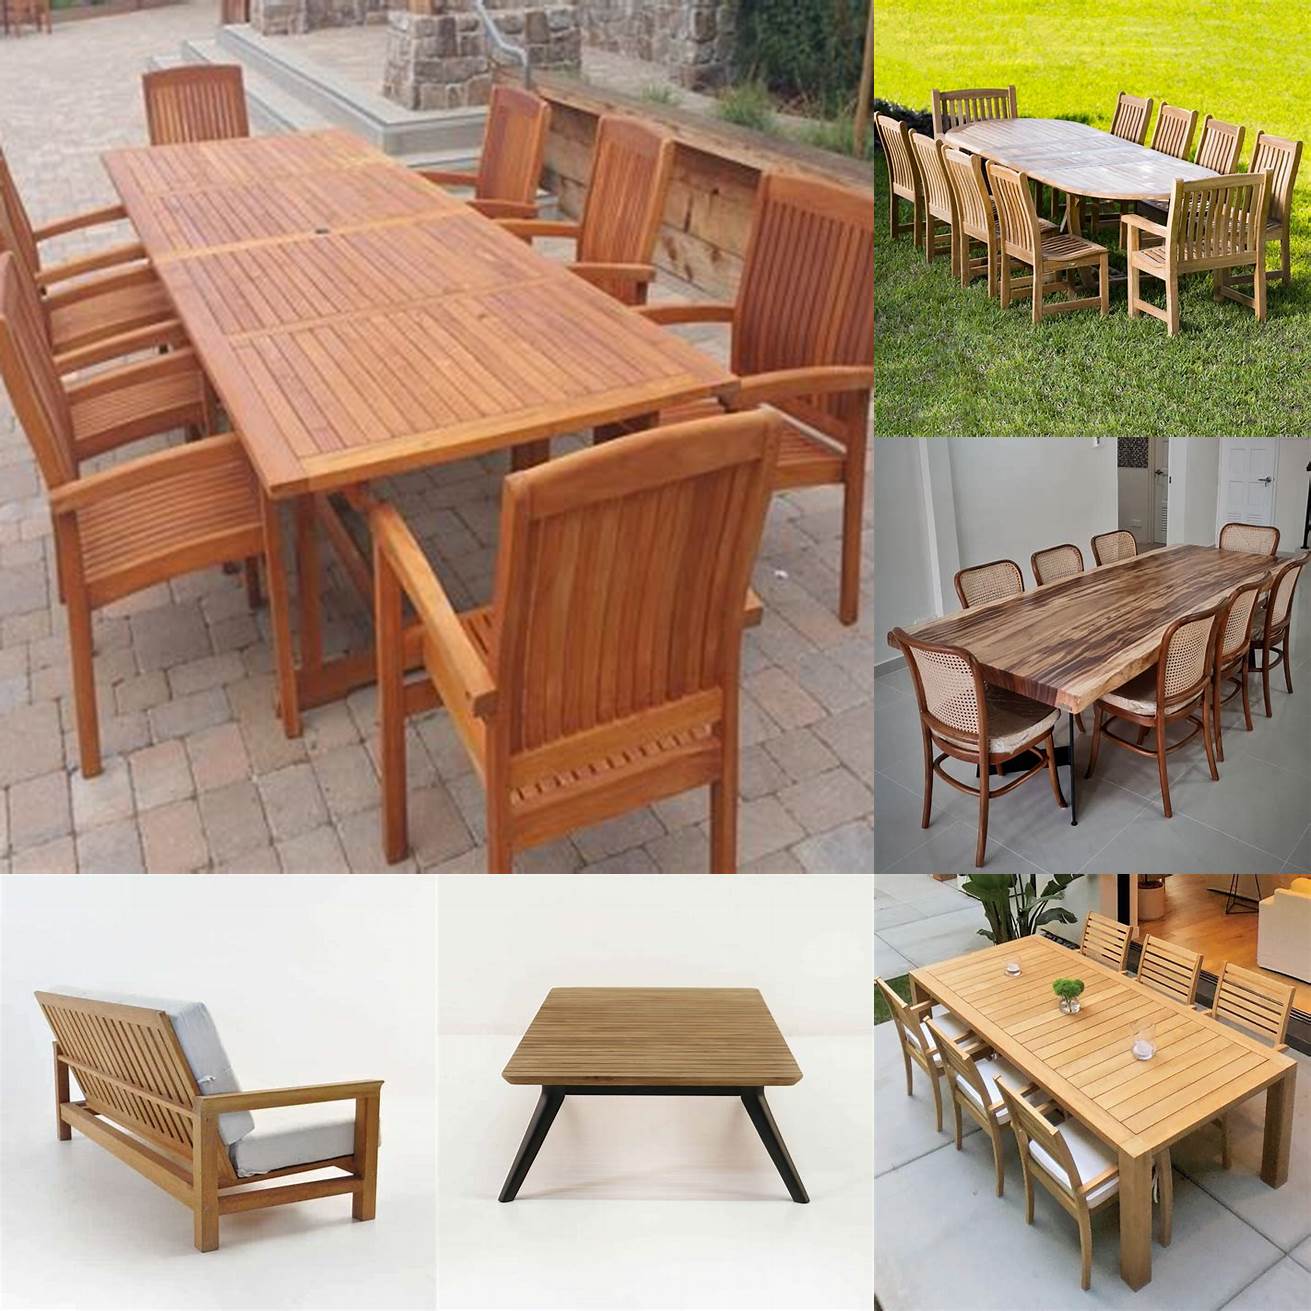 Teak furniture from different warehouses